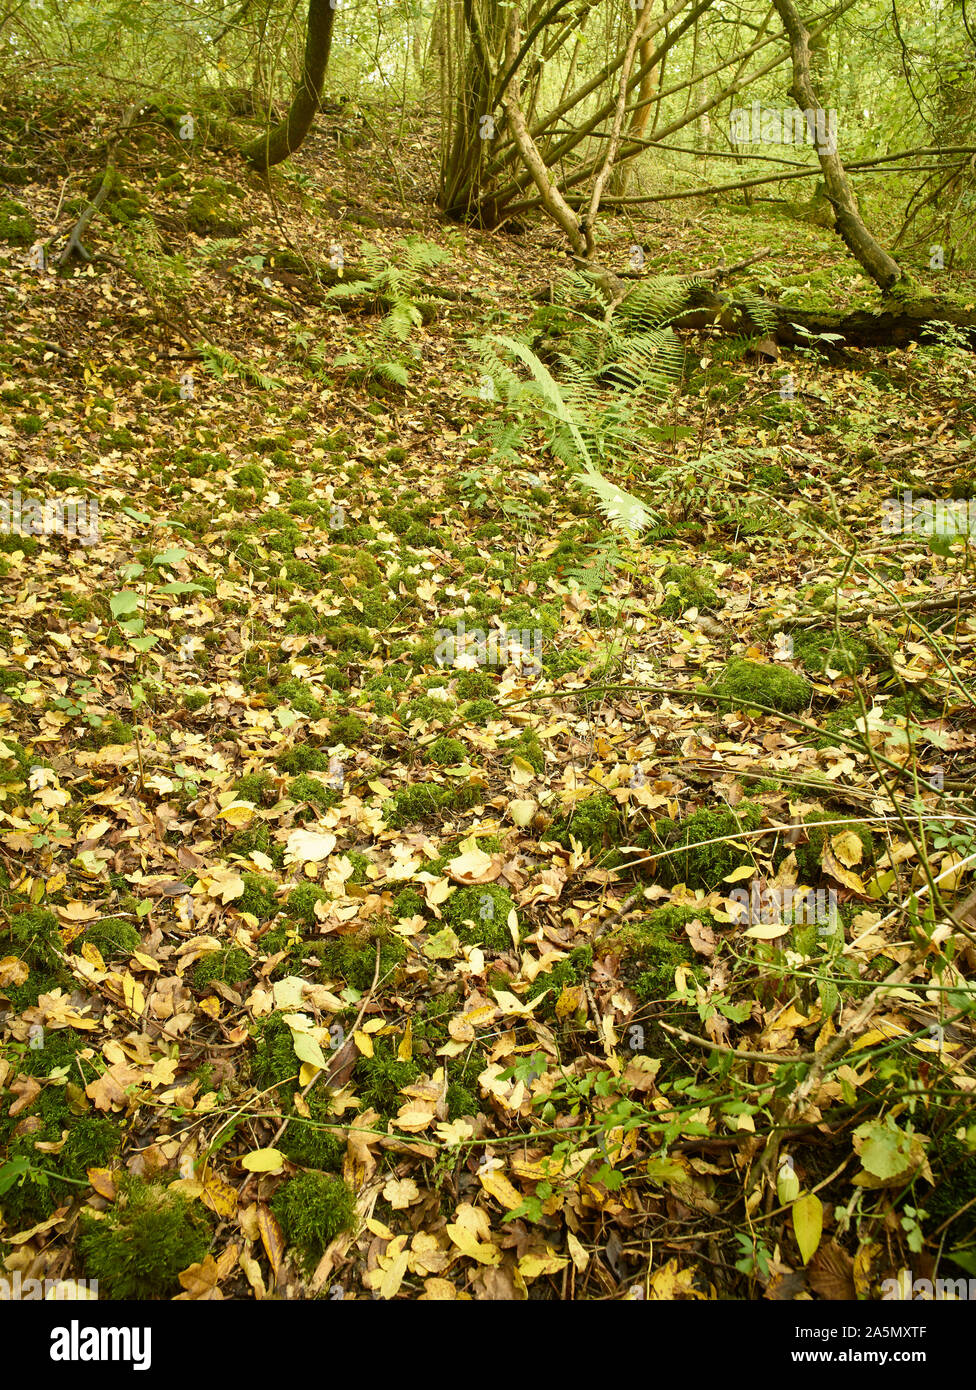 Ferns in autumn on a surrey woodland floor with fallen leaves and changing foliage, Kent, England, United Kingdom, Europe Stock Photo